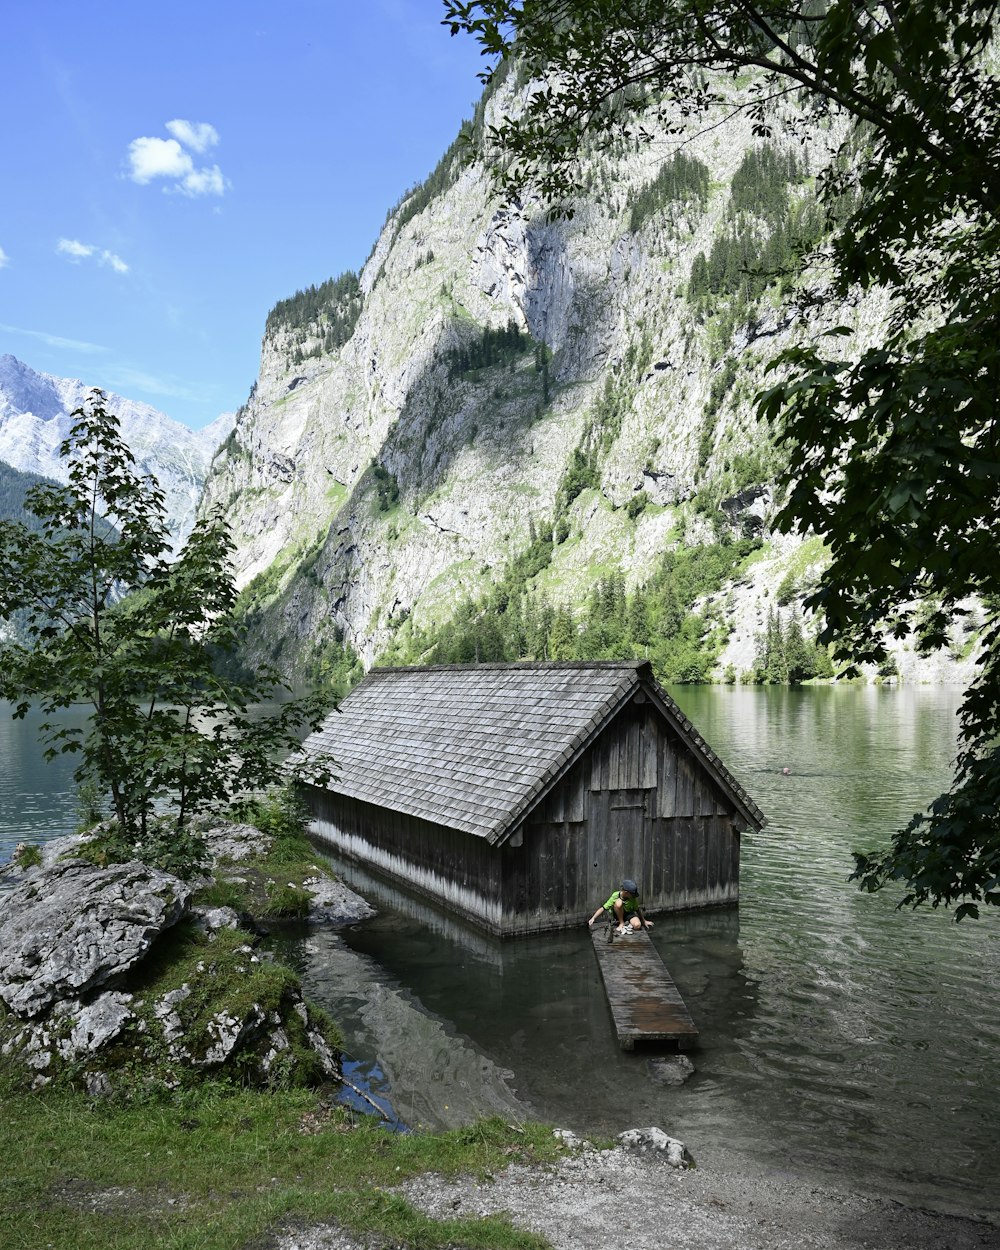 a boathouse in the middle of a lake with mountains in the background